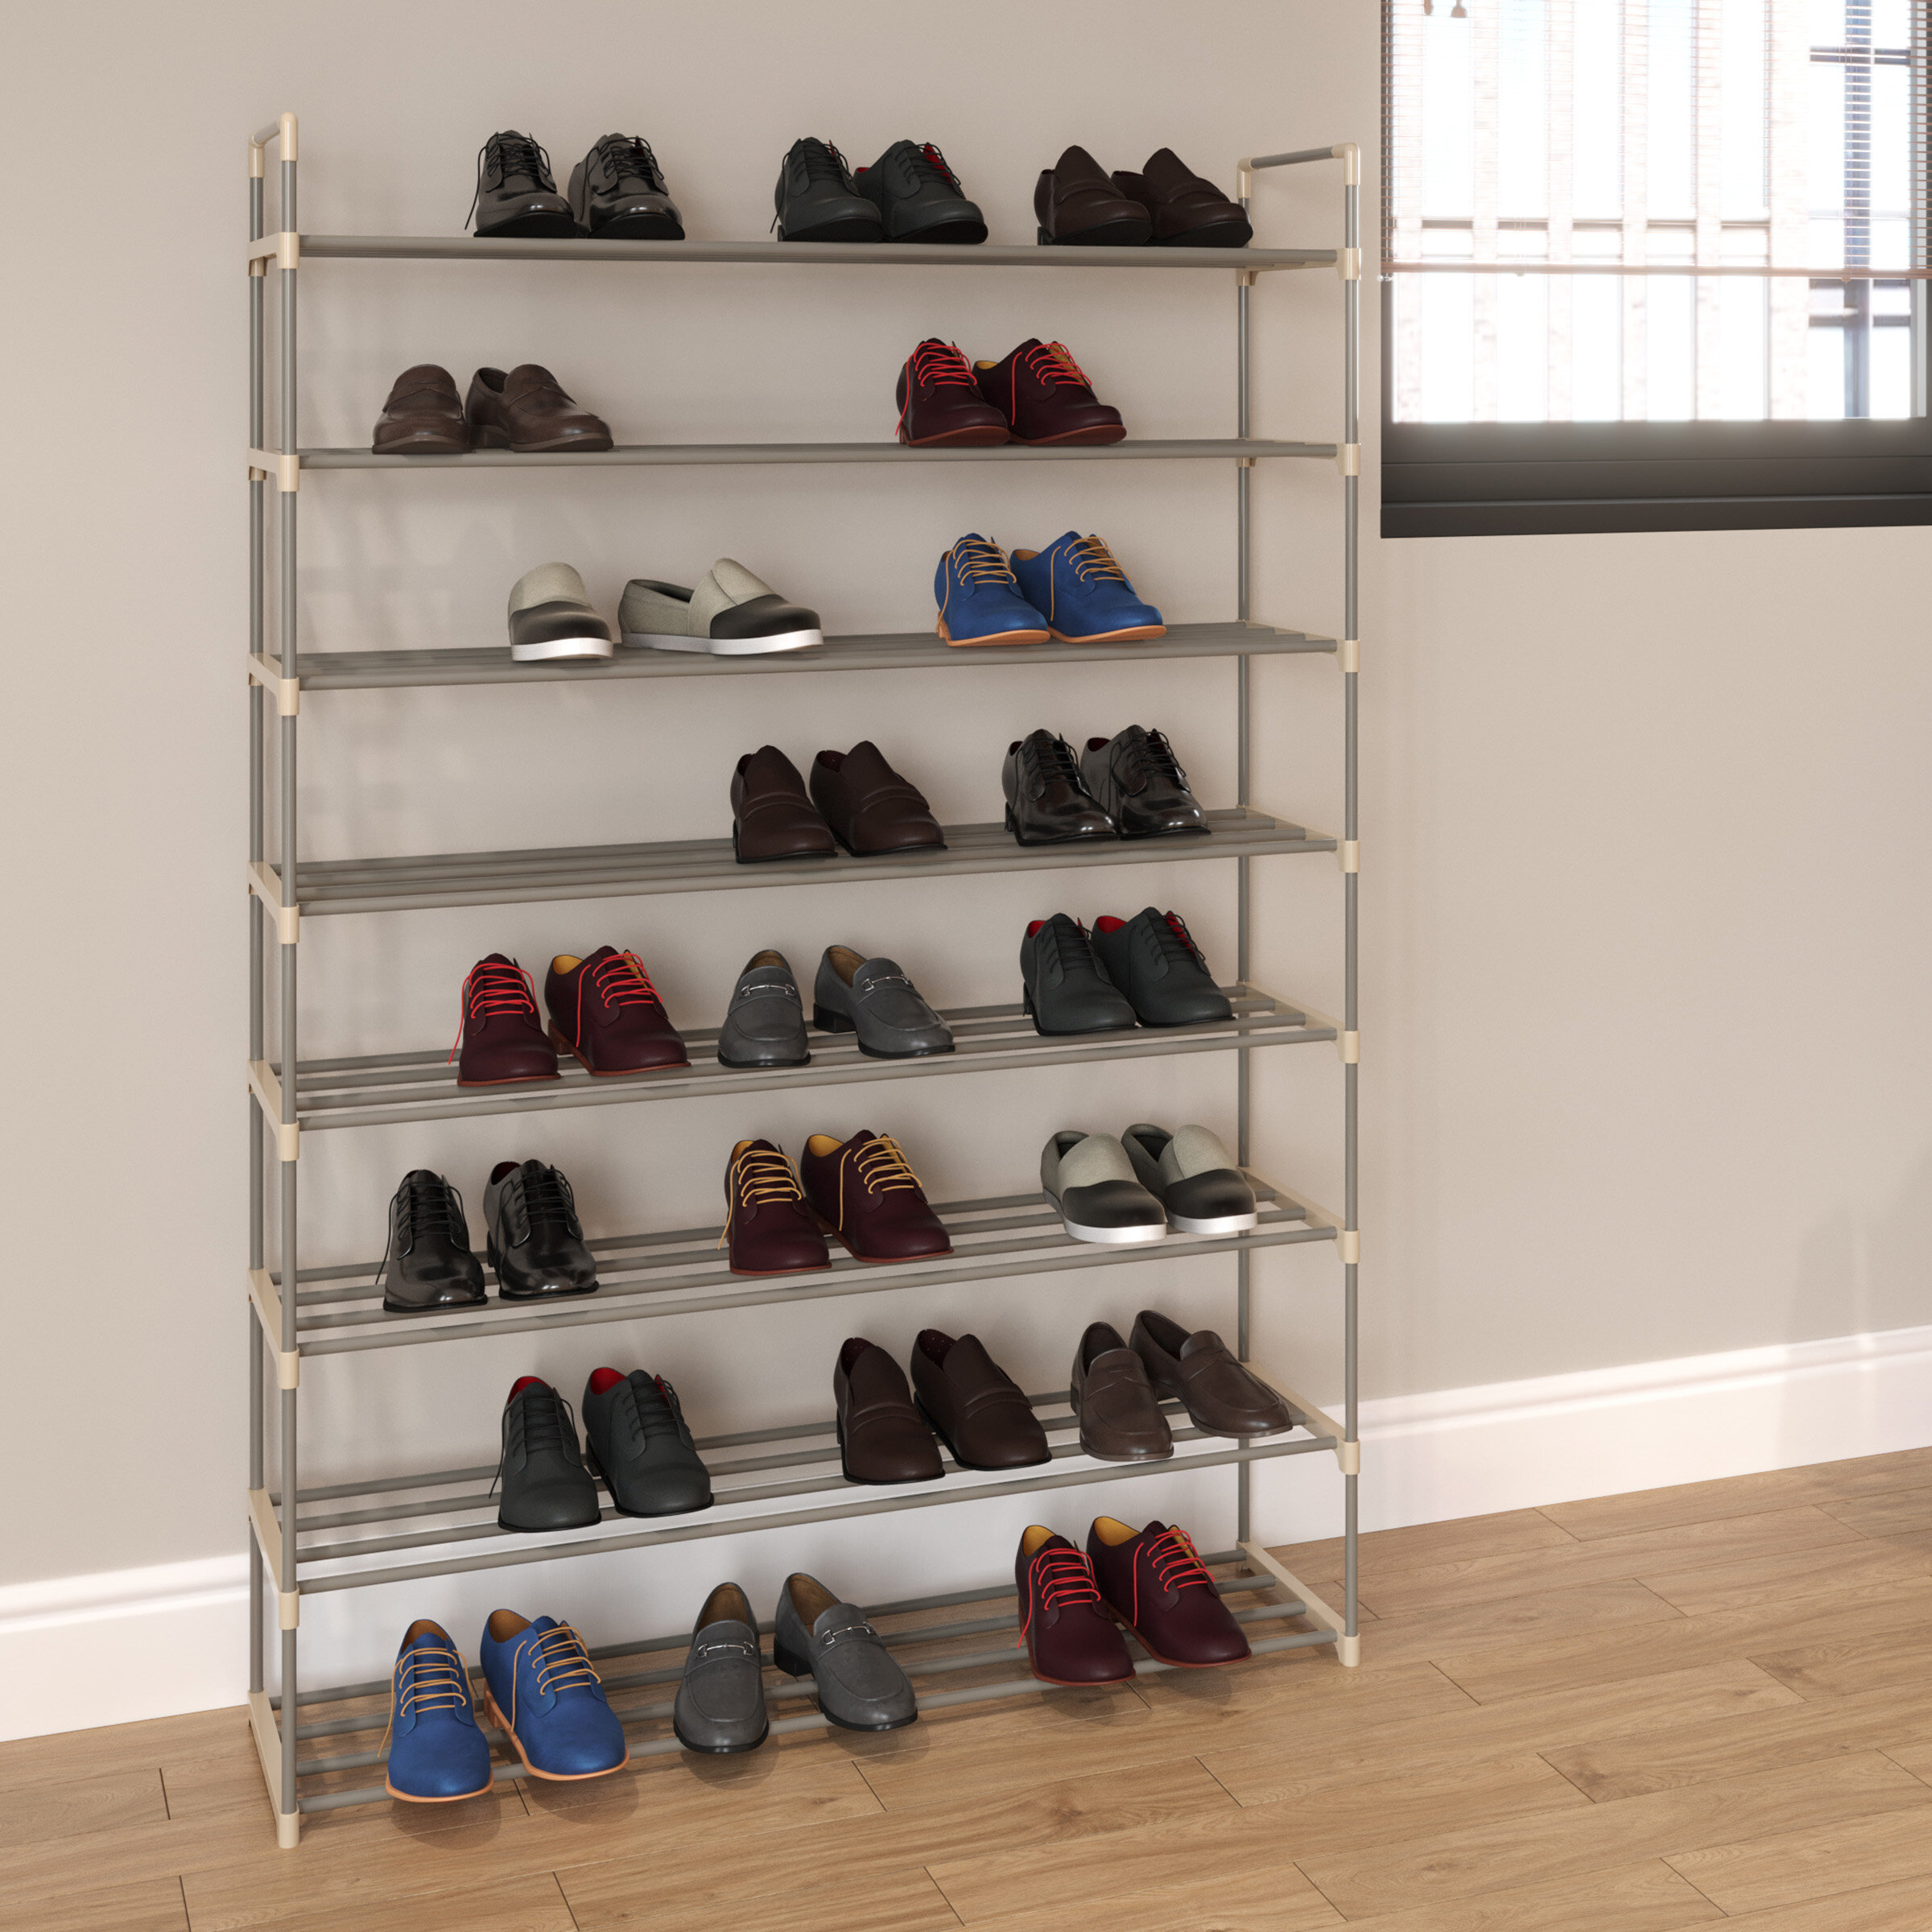 3-Tier Shoe Rack Organizer for Closet, Bathroom, Entryway - Shelf Holds 15 Pairs of Shoes Rebrilliant